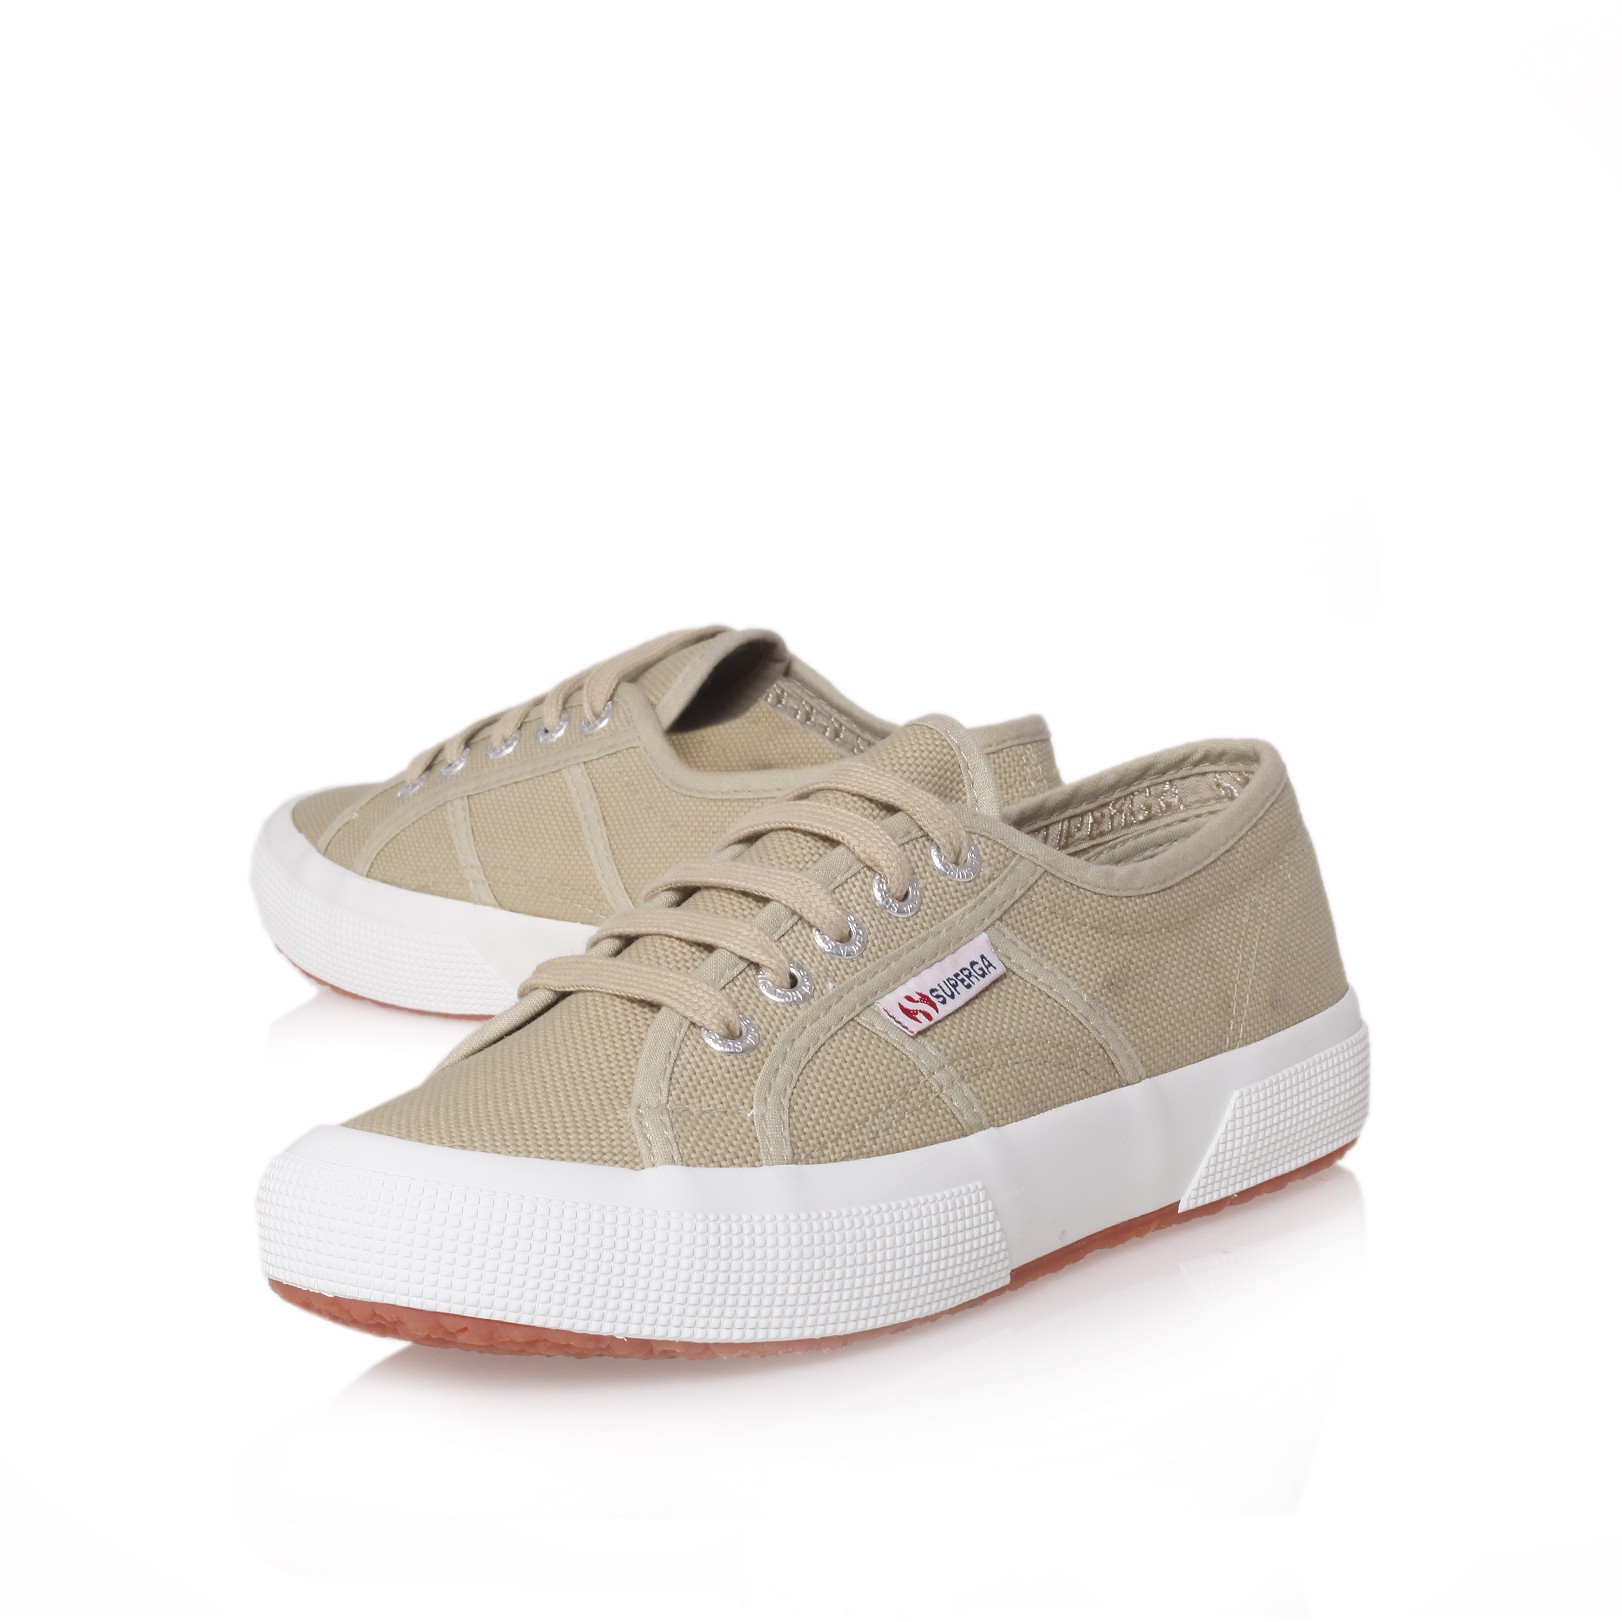 beige supergas official store a0585 2f219